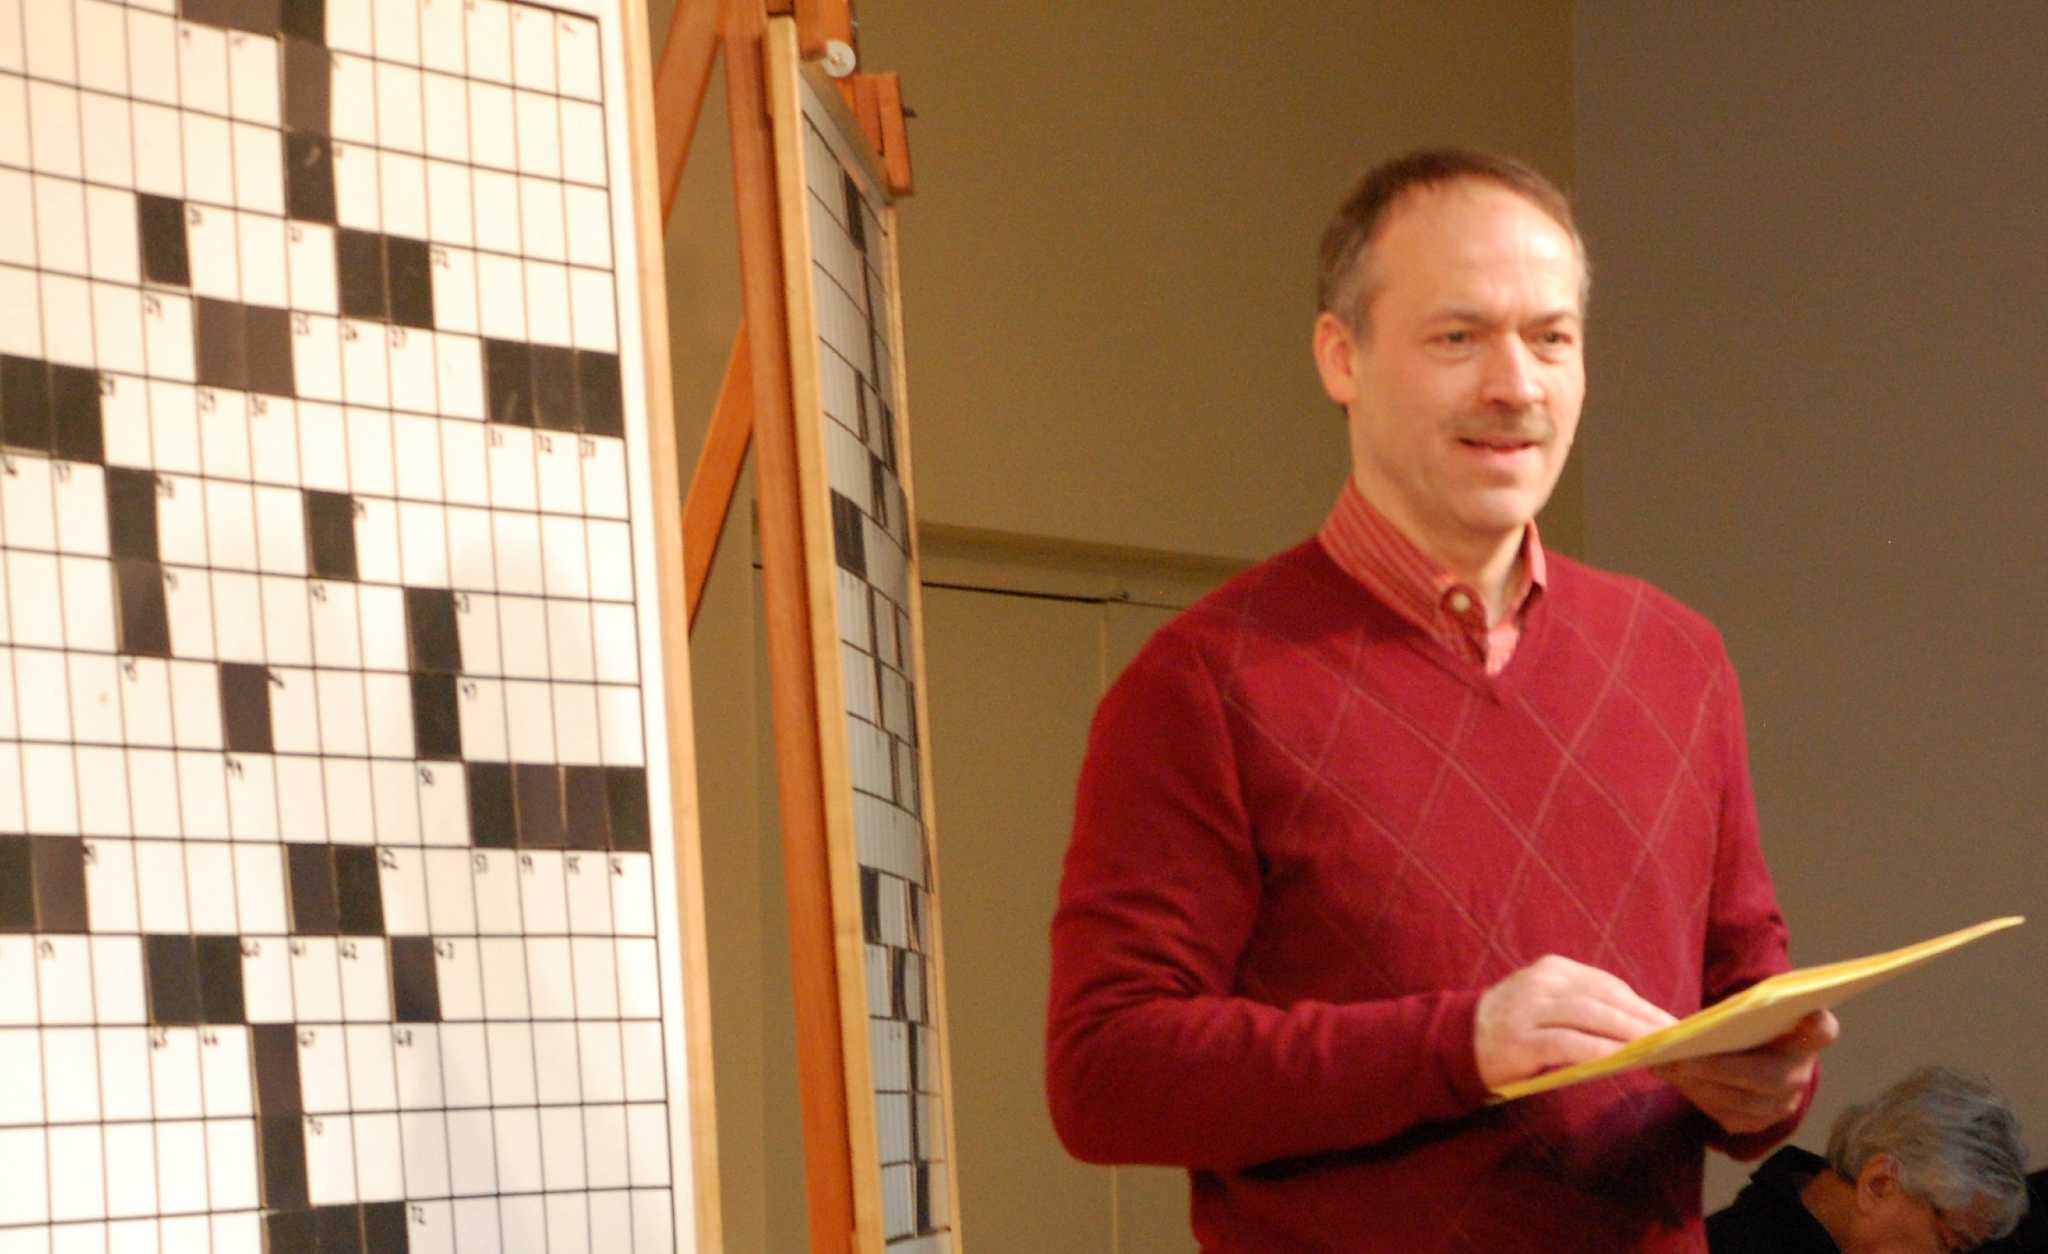 Crossword competitors show a winning way with words